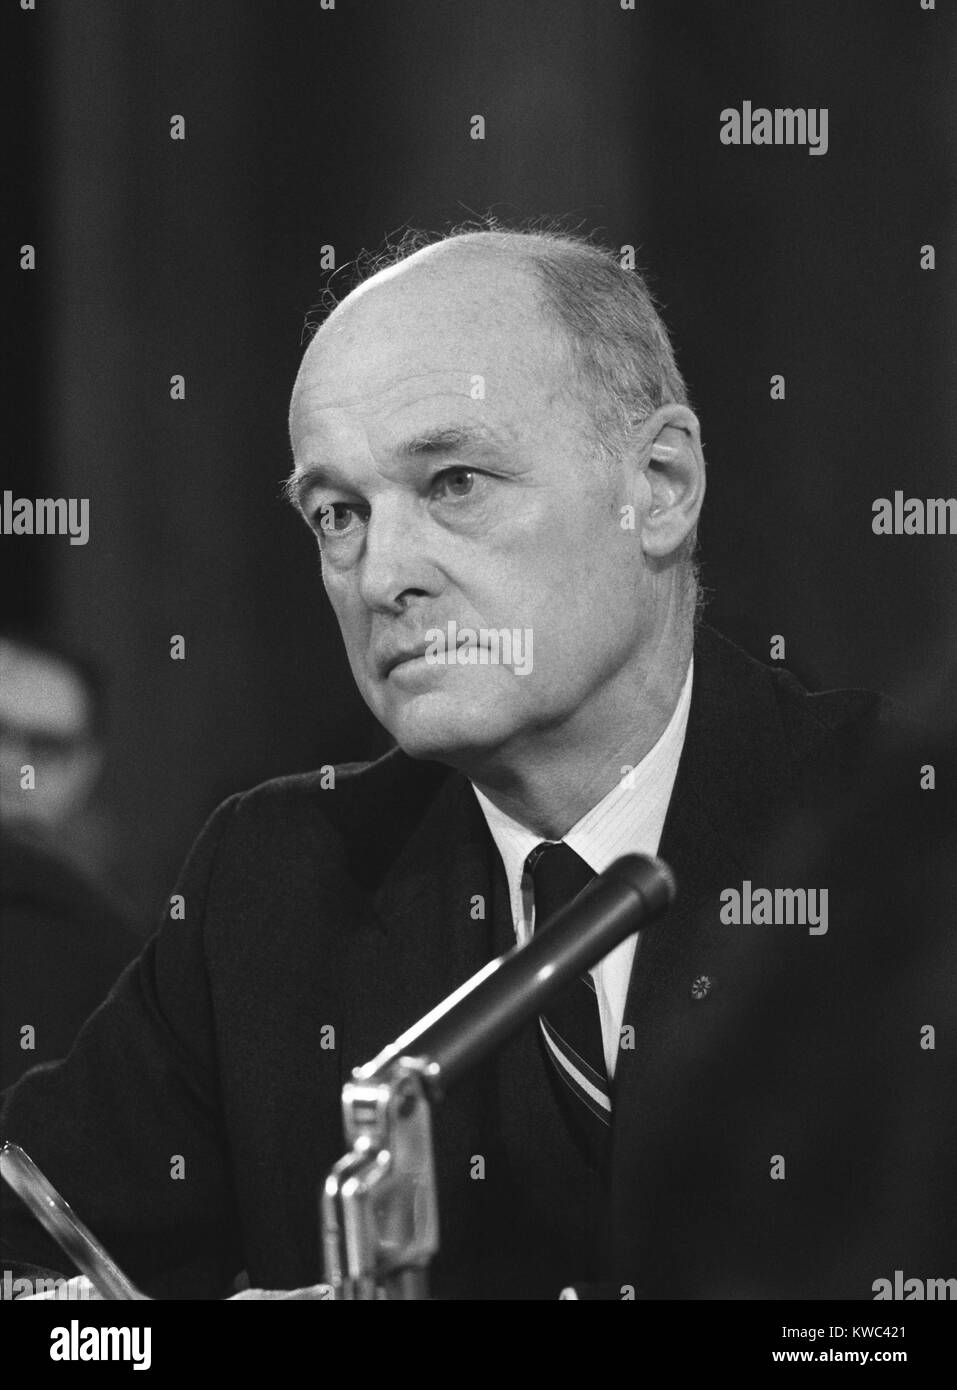 George Kennan, before the U.S. Senate Foreign Relations Committee, Feb. 10, 1966. He testified that Vietnam was not strategic to U.S. interests and doubted the Vietnam War would end in a U.S. victory. (BSLOC 2015 14 35) Stock Photo